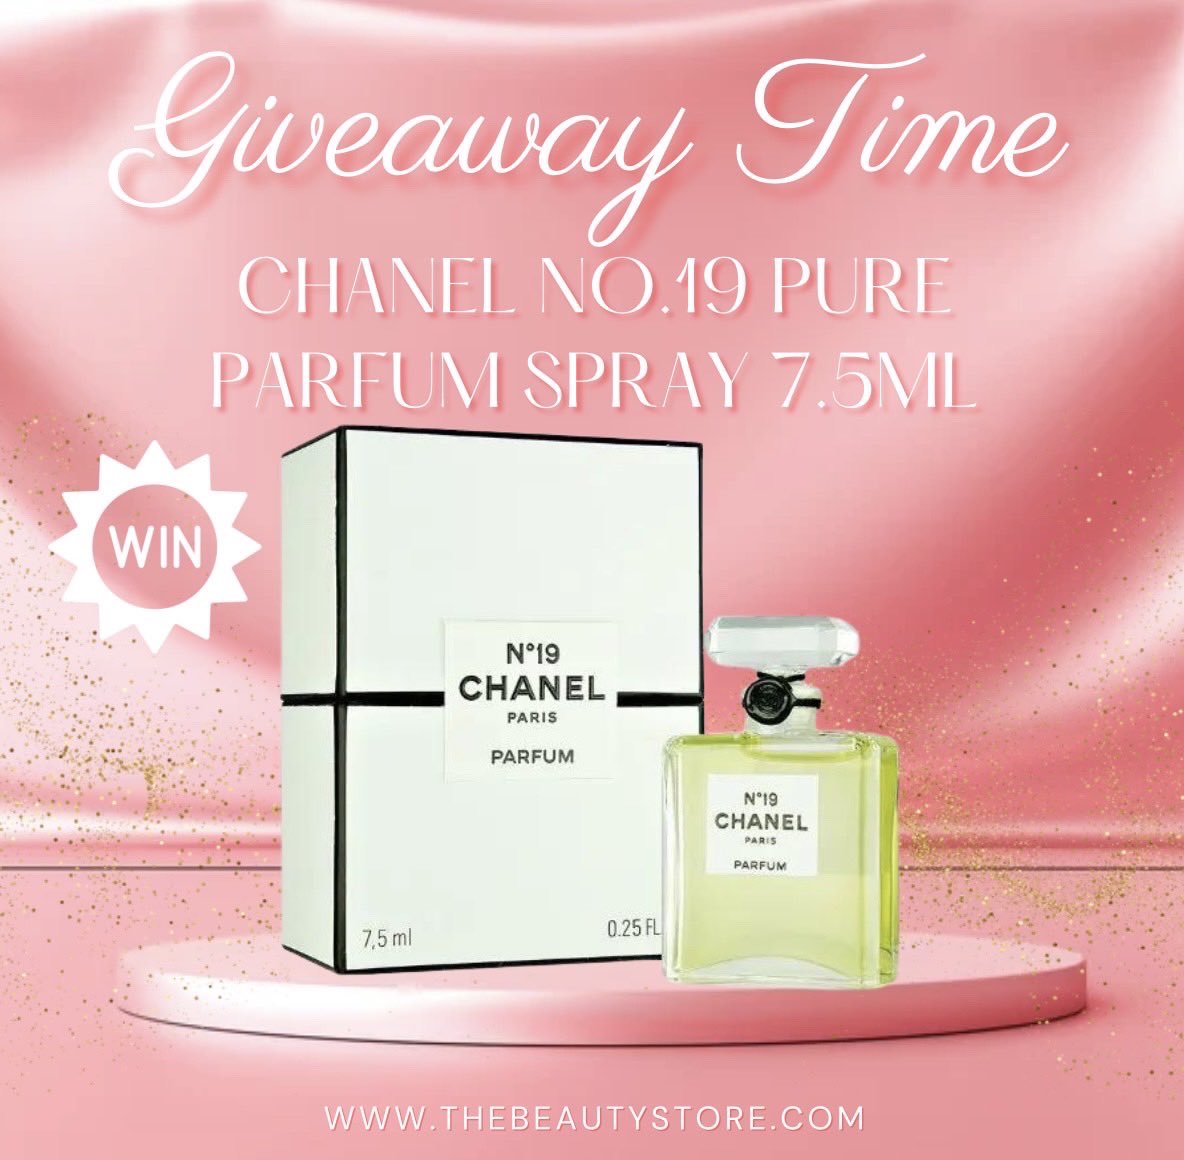 🎉Giveaway Time🎉 Win CHANEL NO.19 PURE PARFUM SPRAY 7.5ML 1️⃣ Like & share this post  2️⃣ Tag your bestie 3️⃣ Make sure you are following @thebeautystorecom 🎉 Competition ends Monday 18th March 6pm! Good Luck!  thebeautystore.com #competition #competitiontime #win #winning